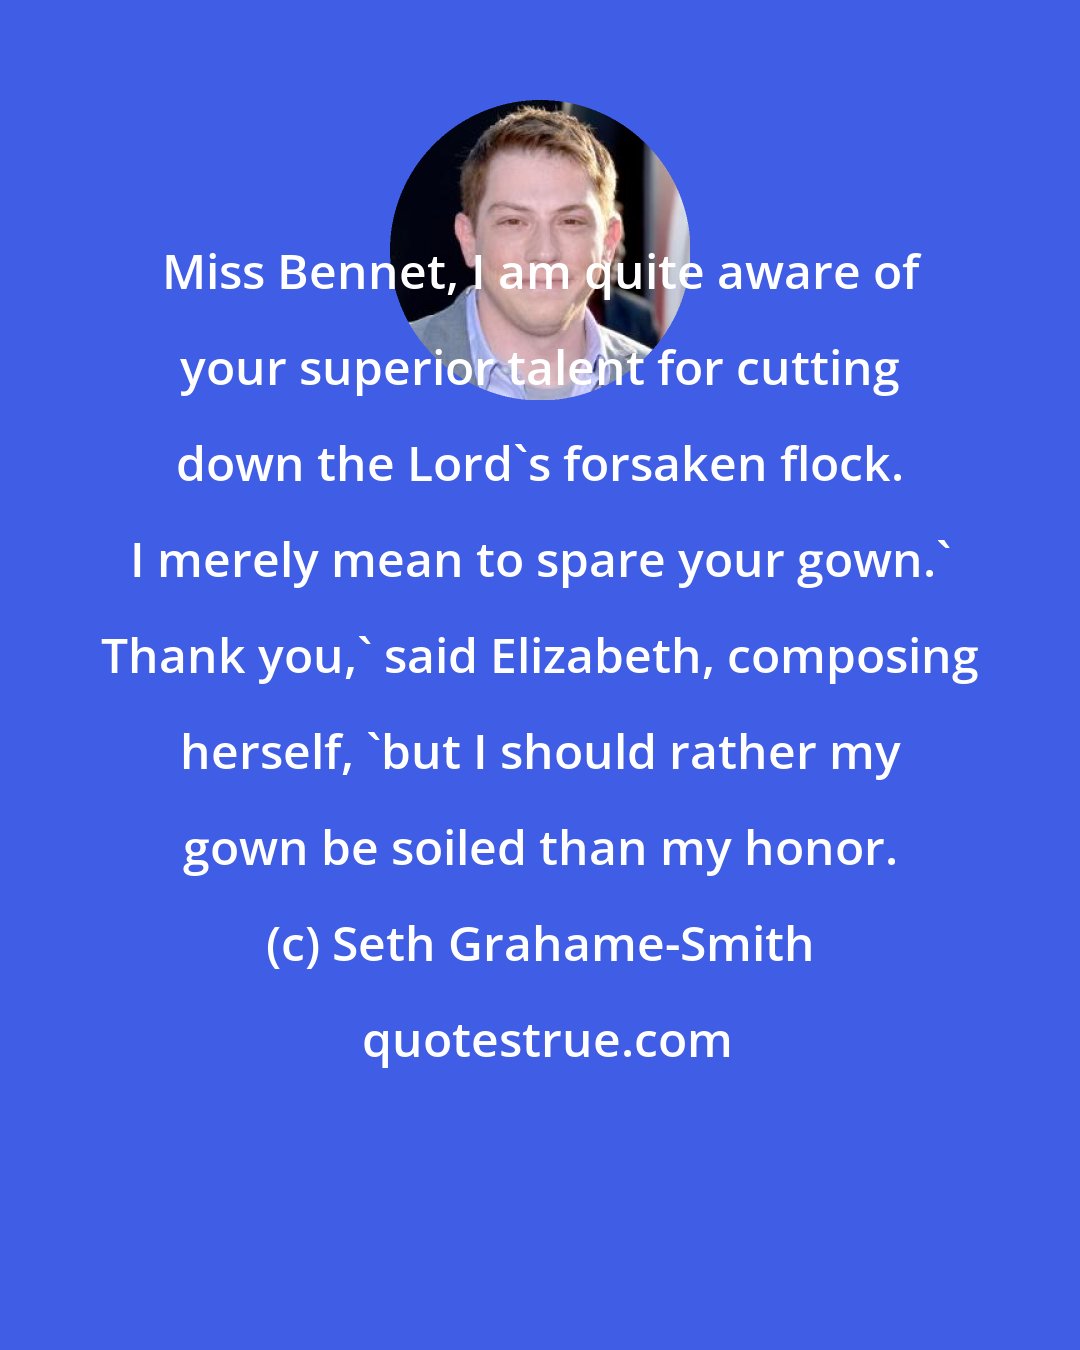 Seth Grahame-Smith: Miss Bennet, I am quite aware of your superior talent for cutting down the Lord's forsaken flock. I merely mean to spare your gown.' Thank you,' said Elizabeth, composing herself, 'but I should rather my gown be soiled than my honor.